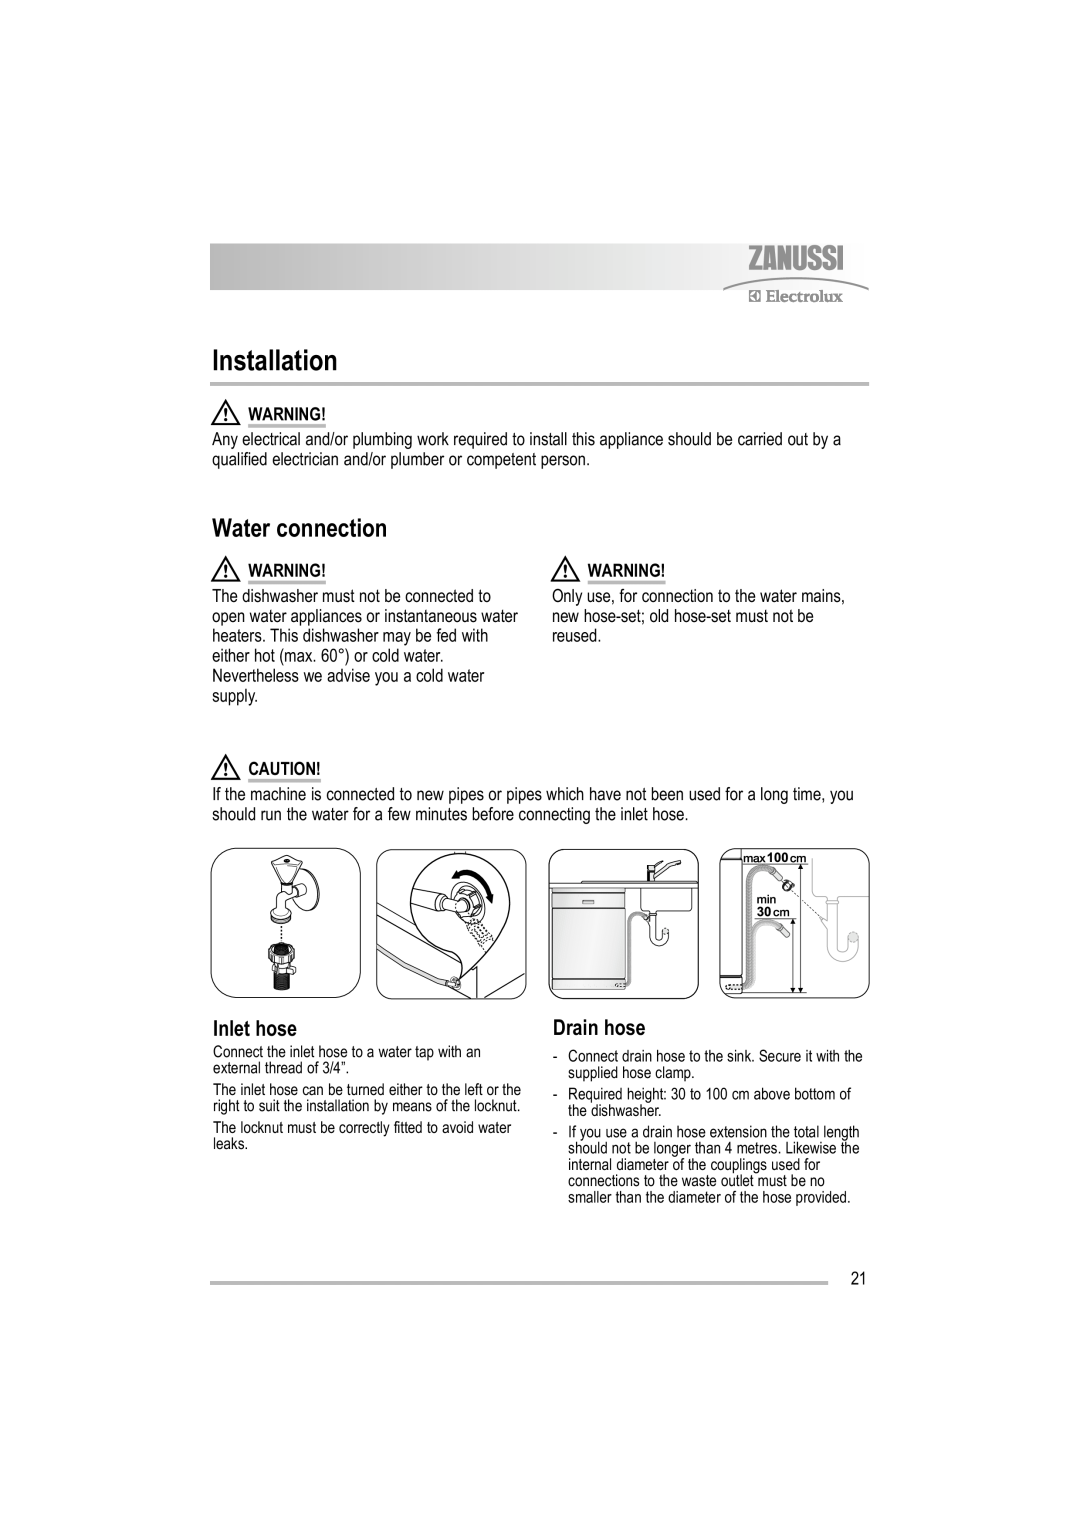 Zanussi ZDF 221 user manual Installation, Water connection, Inlet hose, Drain hose 